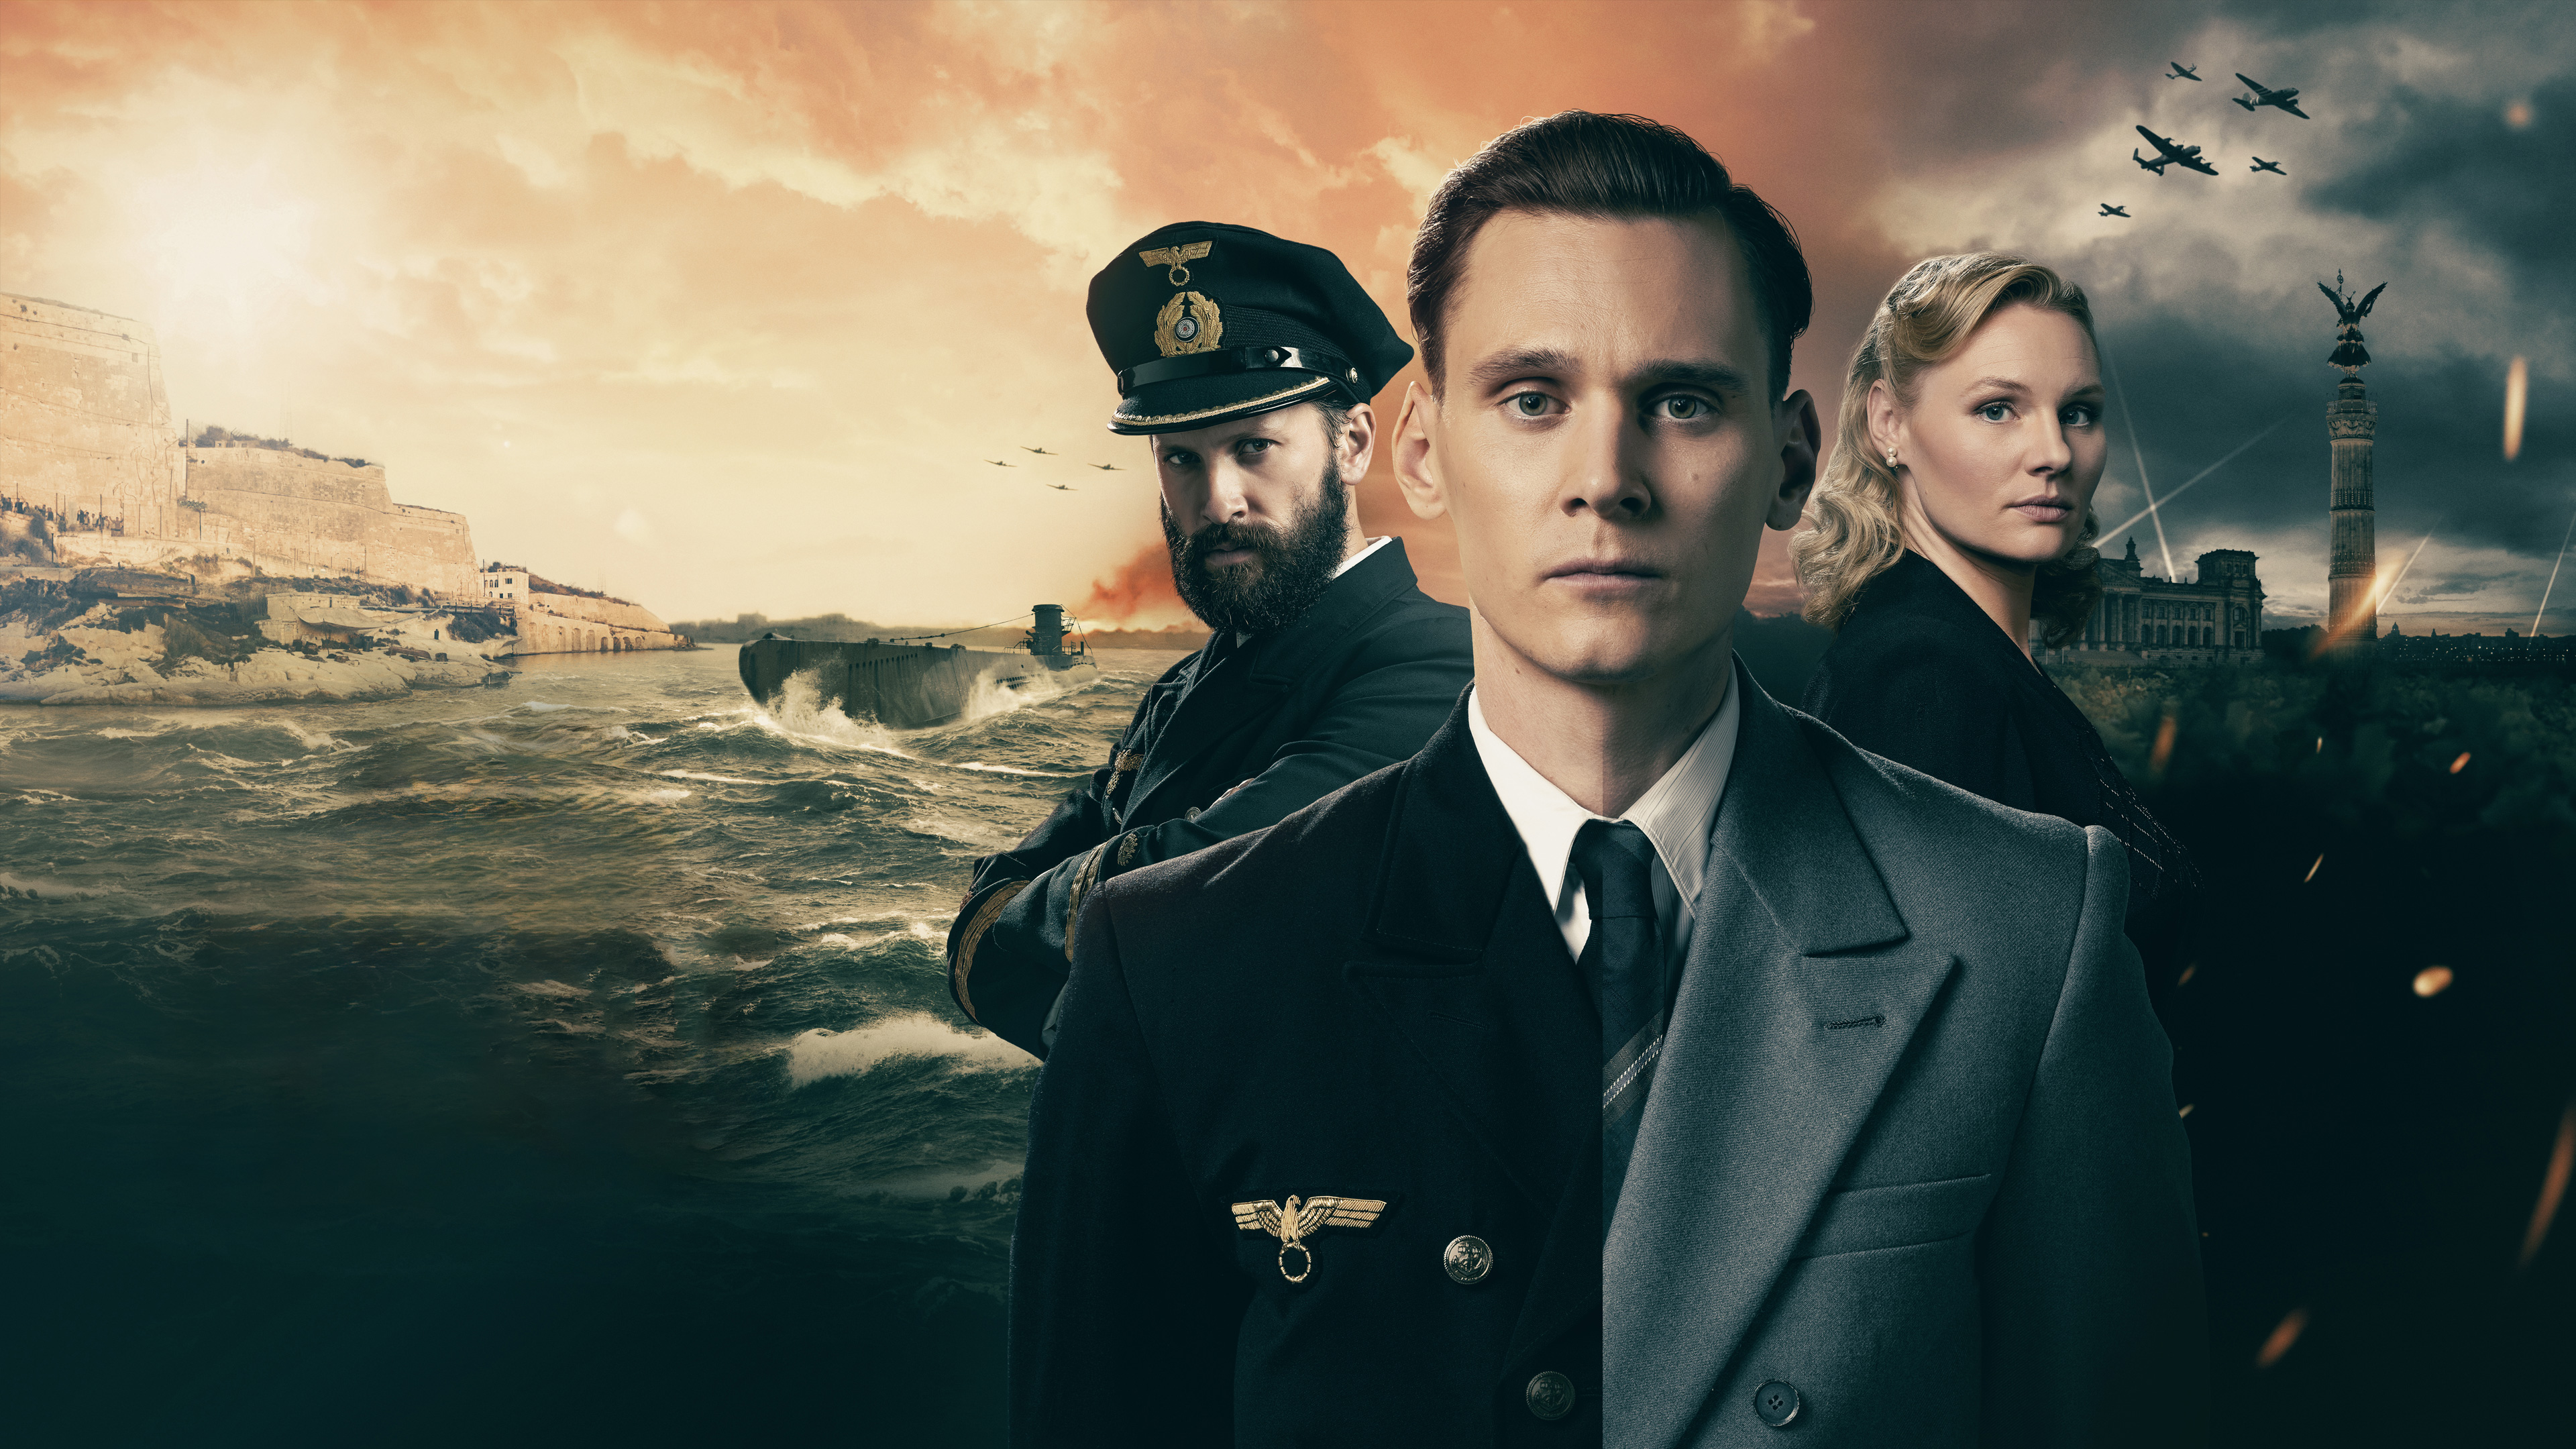 Das Boot newcomer teases 'moral dilemma' for character in season 3